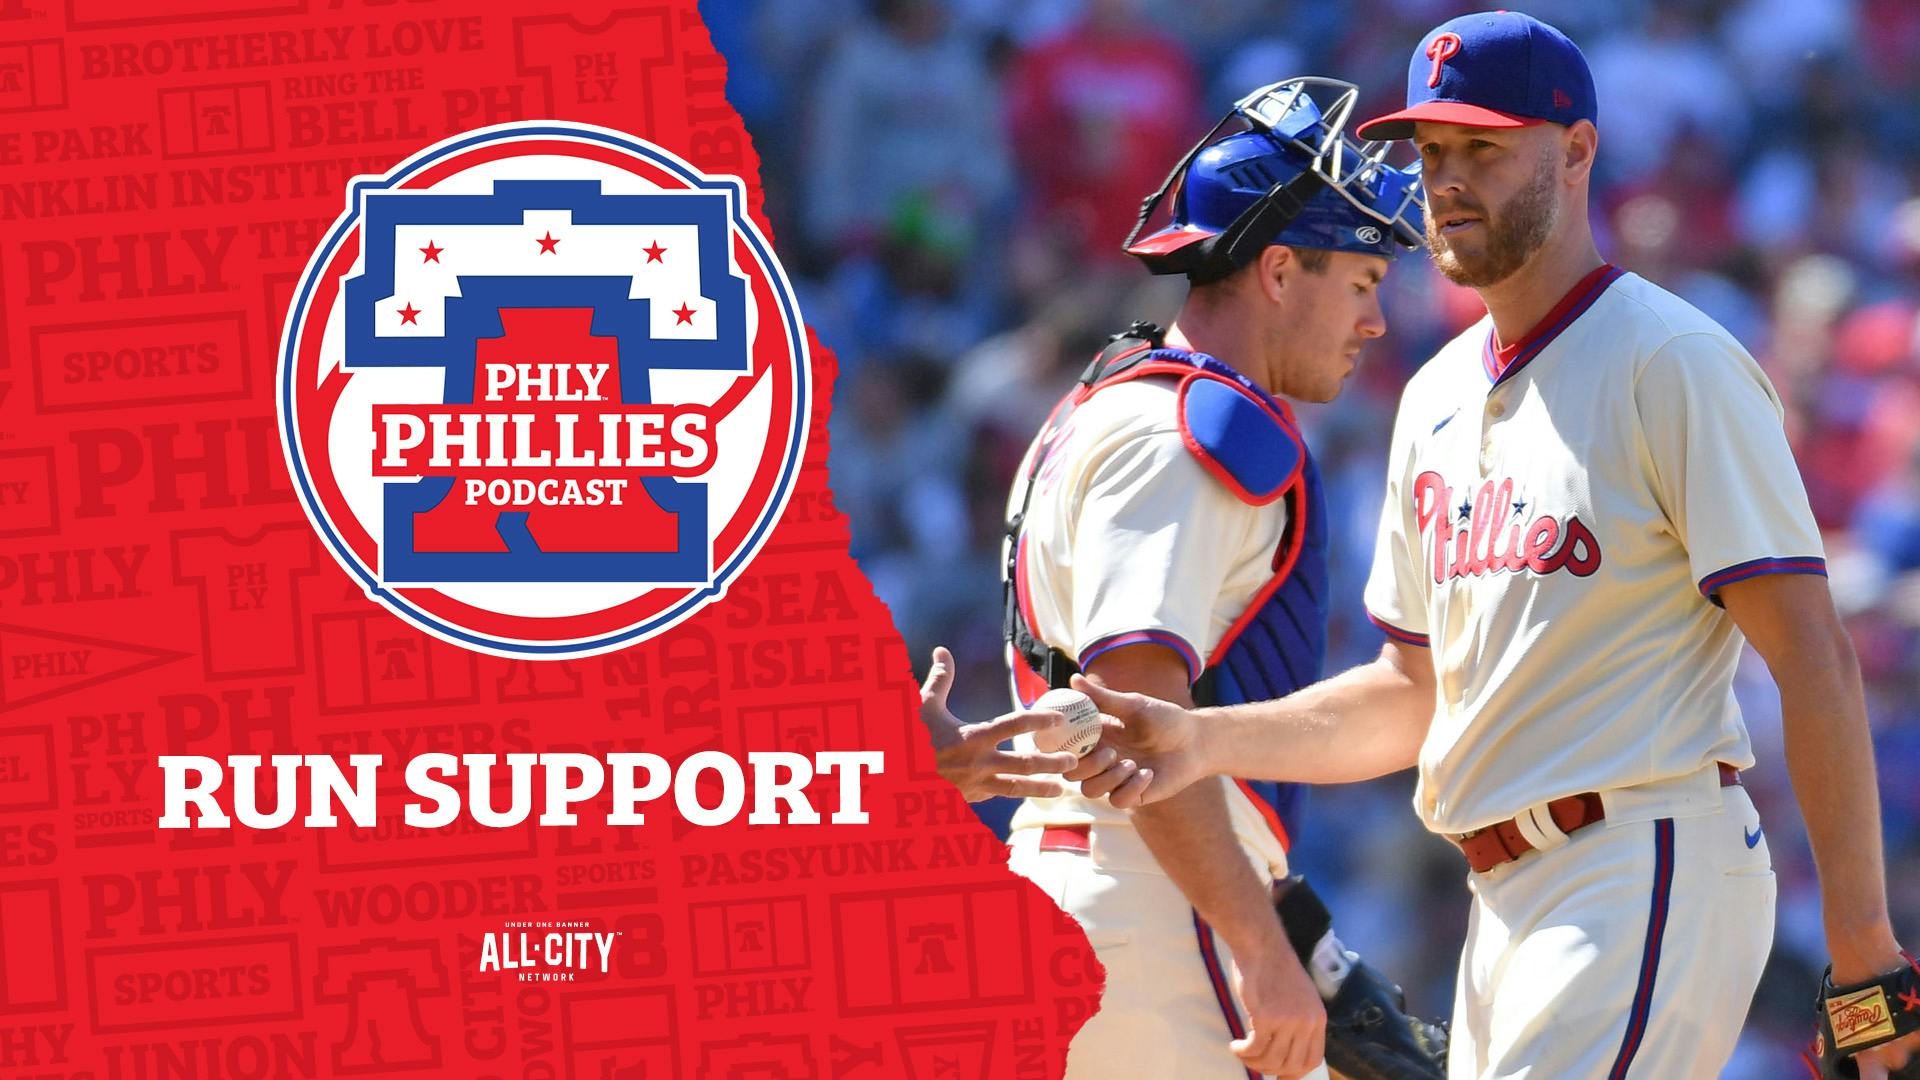 PHLY Phillies Podcast | Trea Turner, Nick Castellanos have bright moment, Zack Wheeler gets no run support in Pirates split